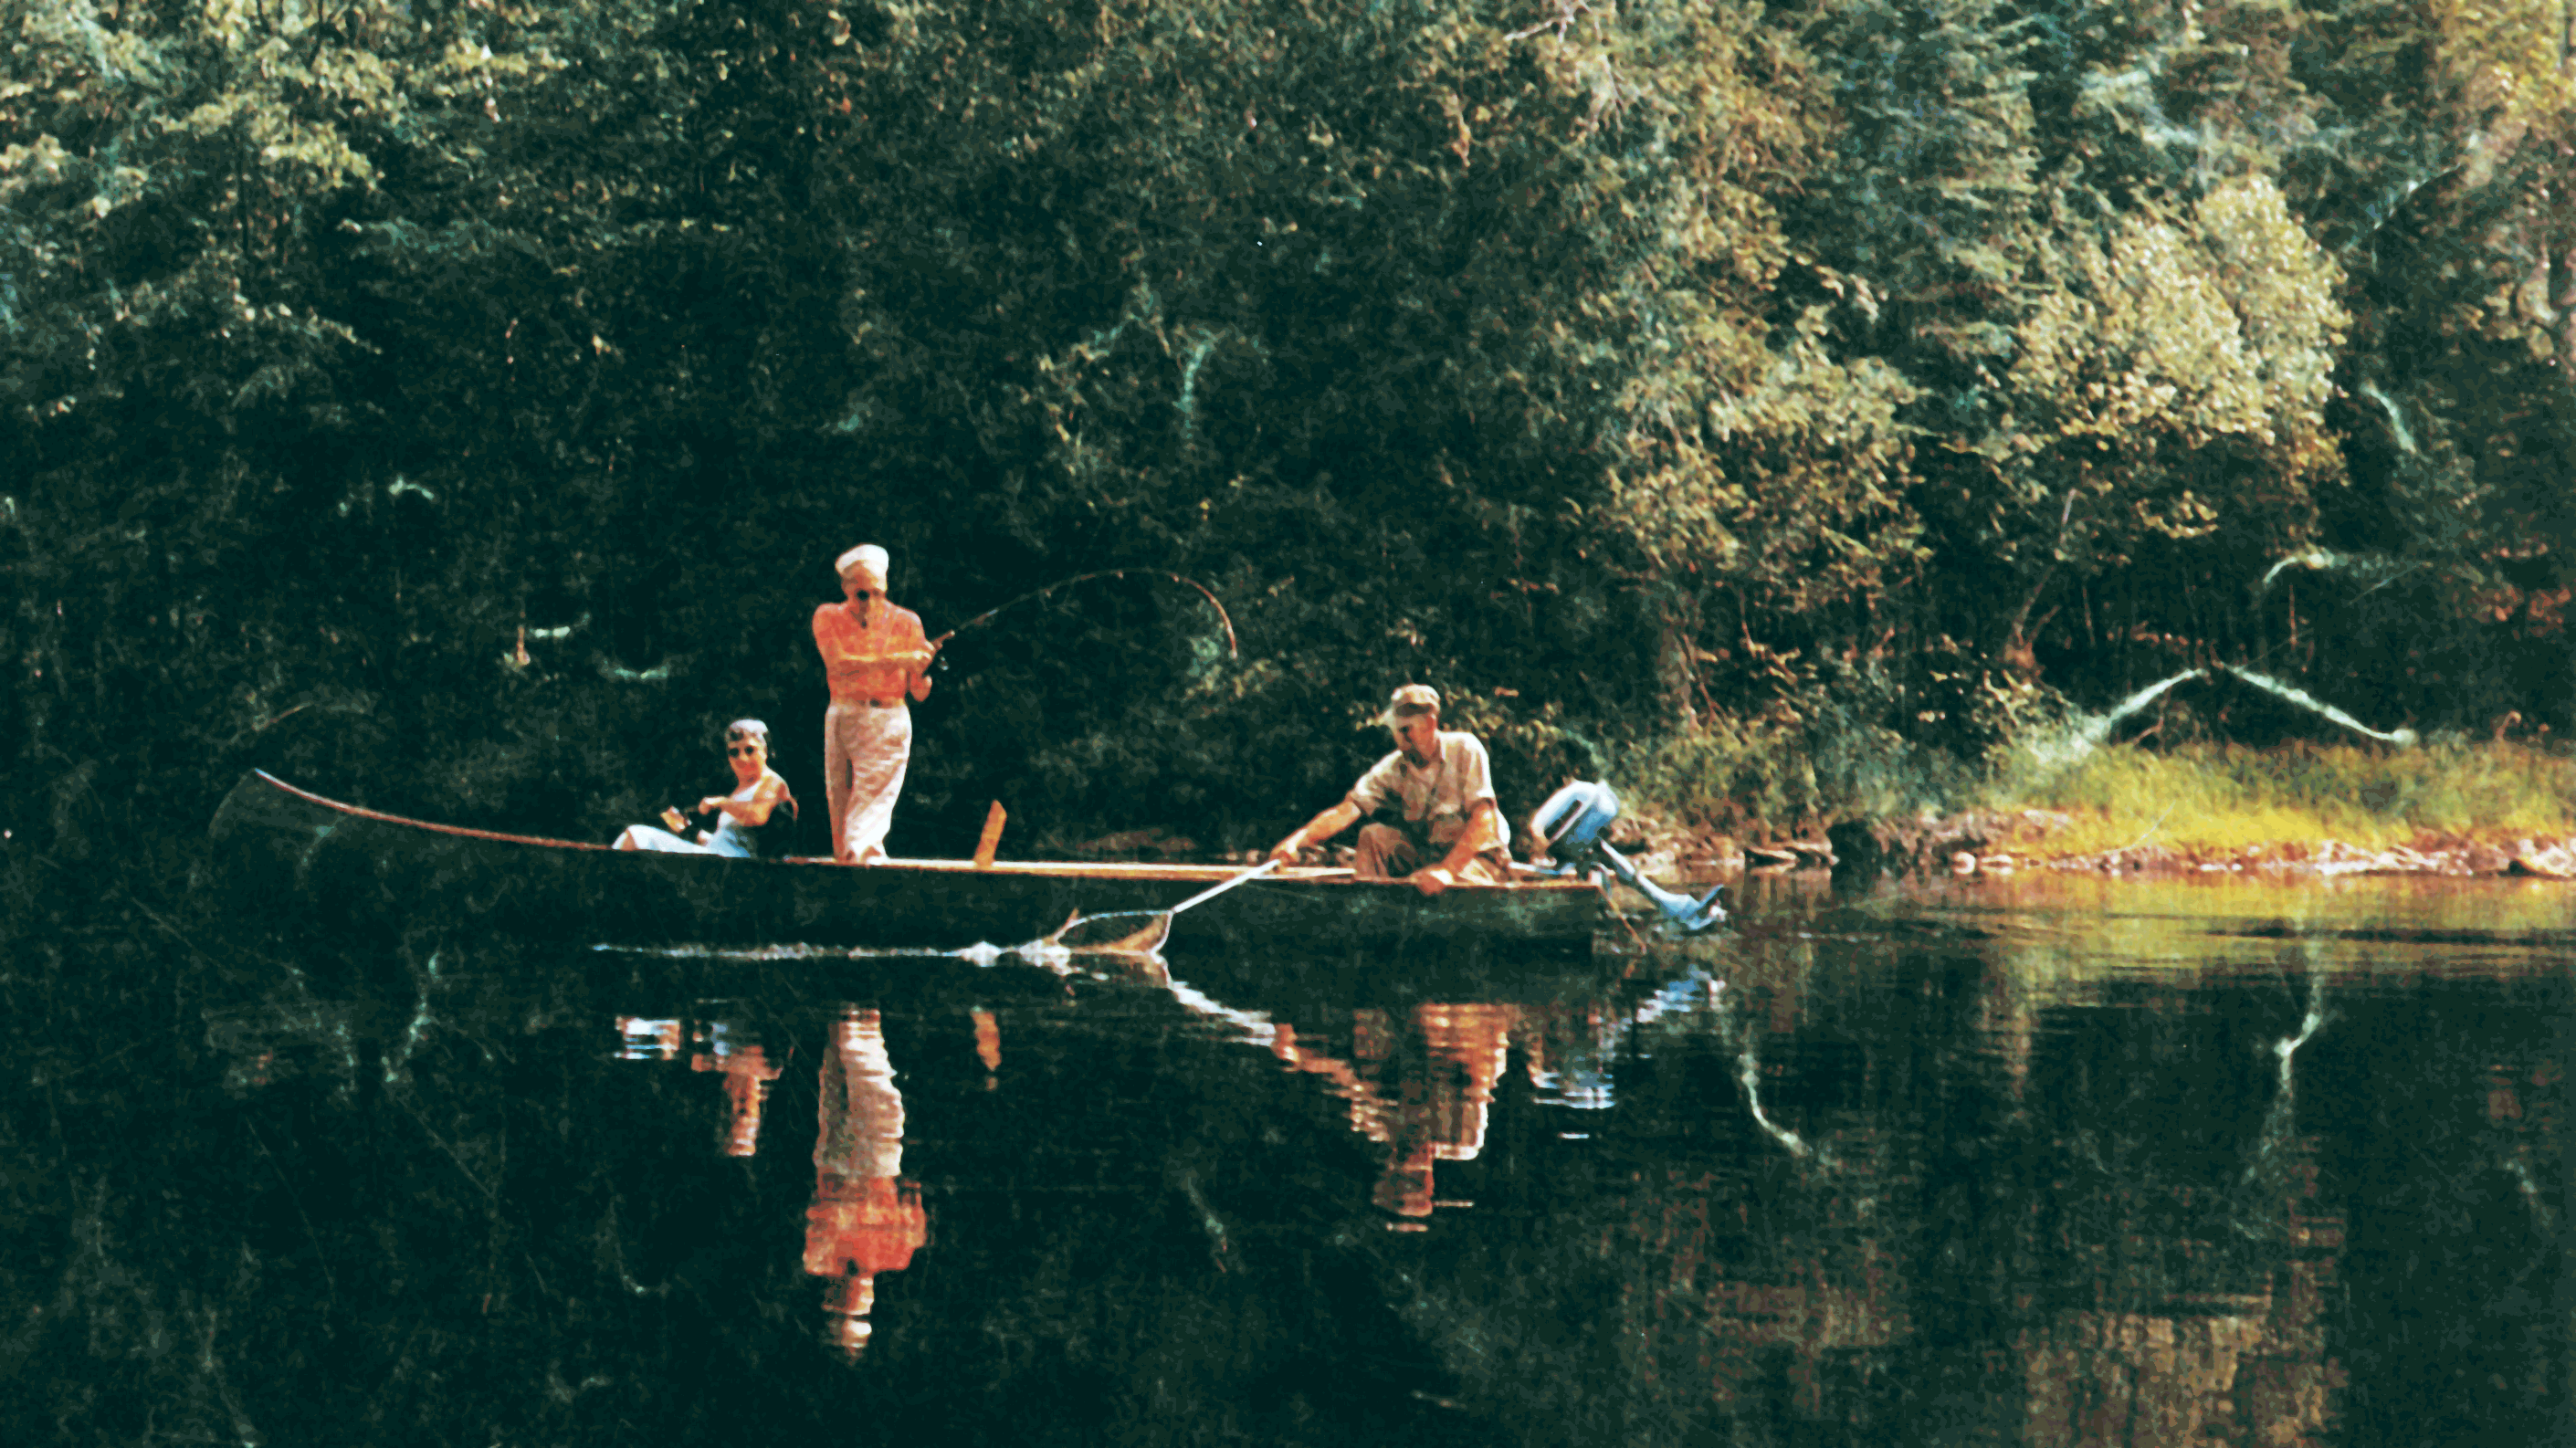 Loon Bay Lodge and the St. Croix River have been enjoyed by guests for generations.